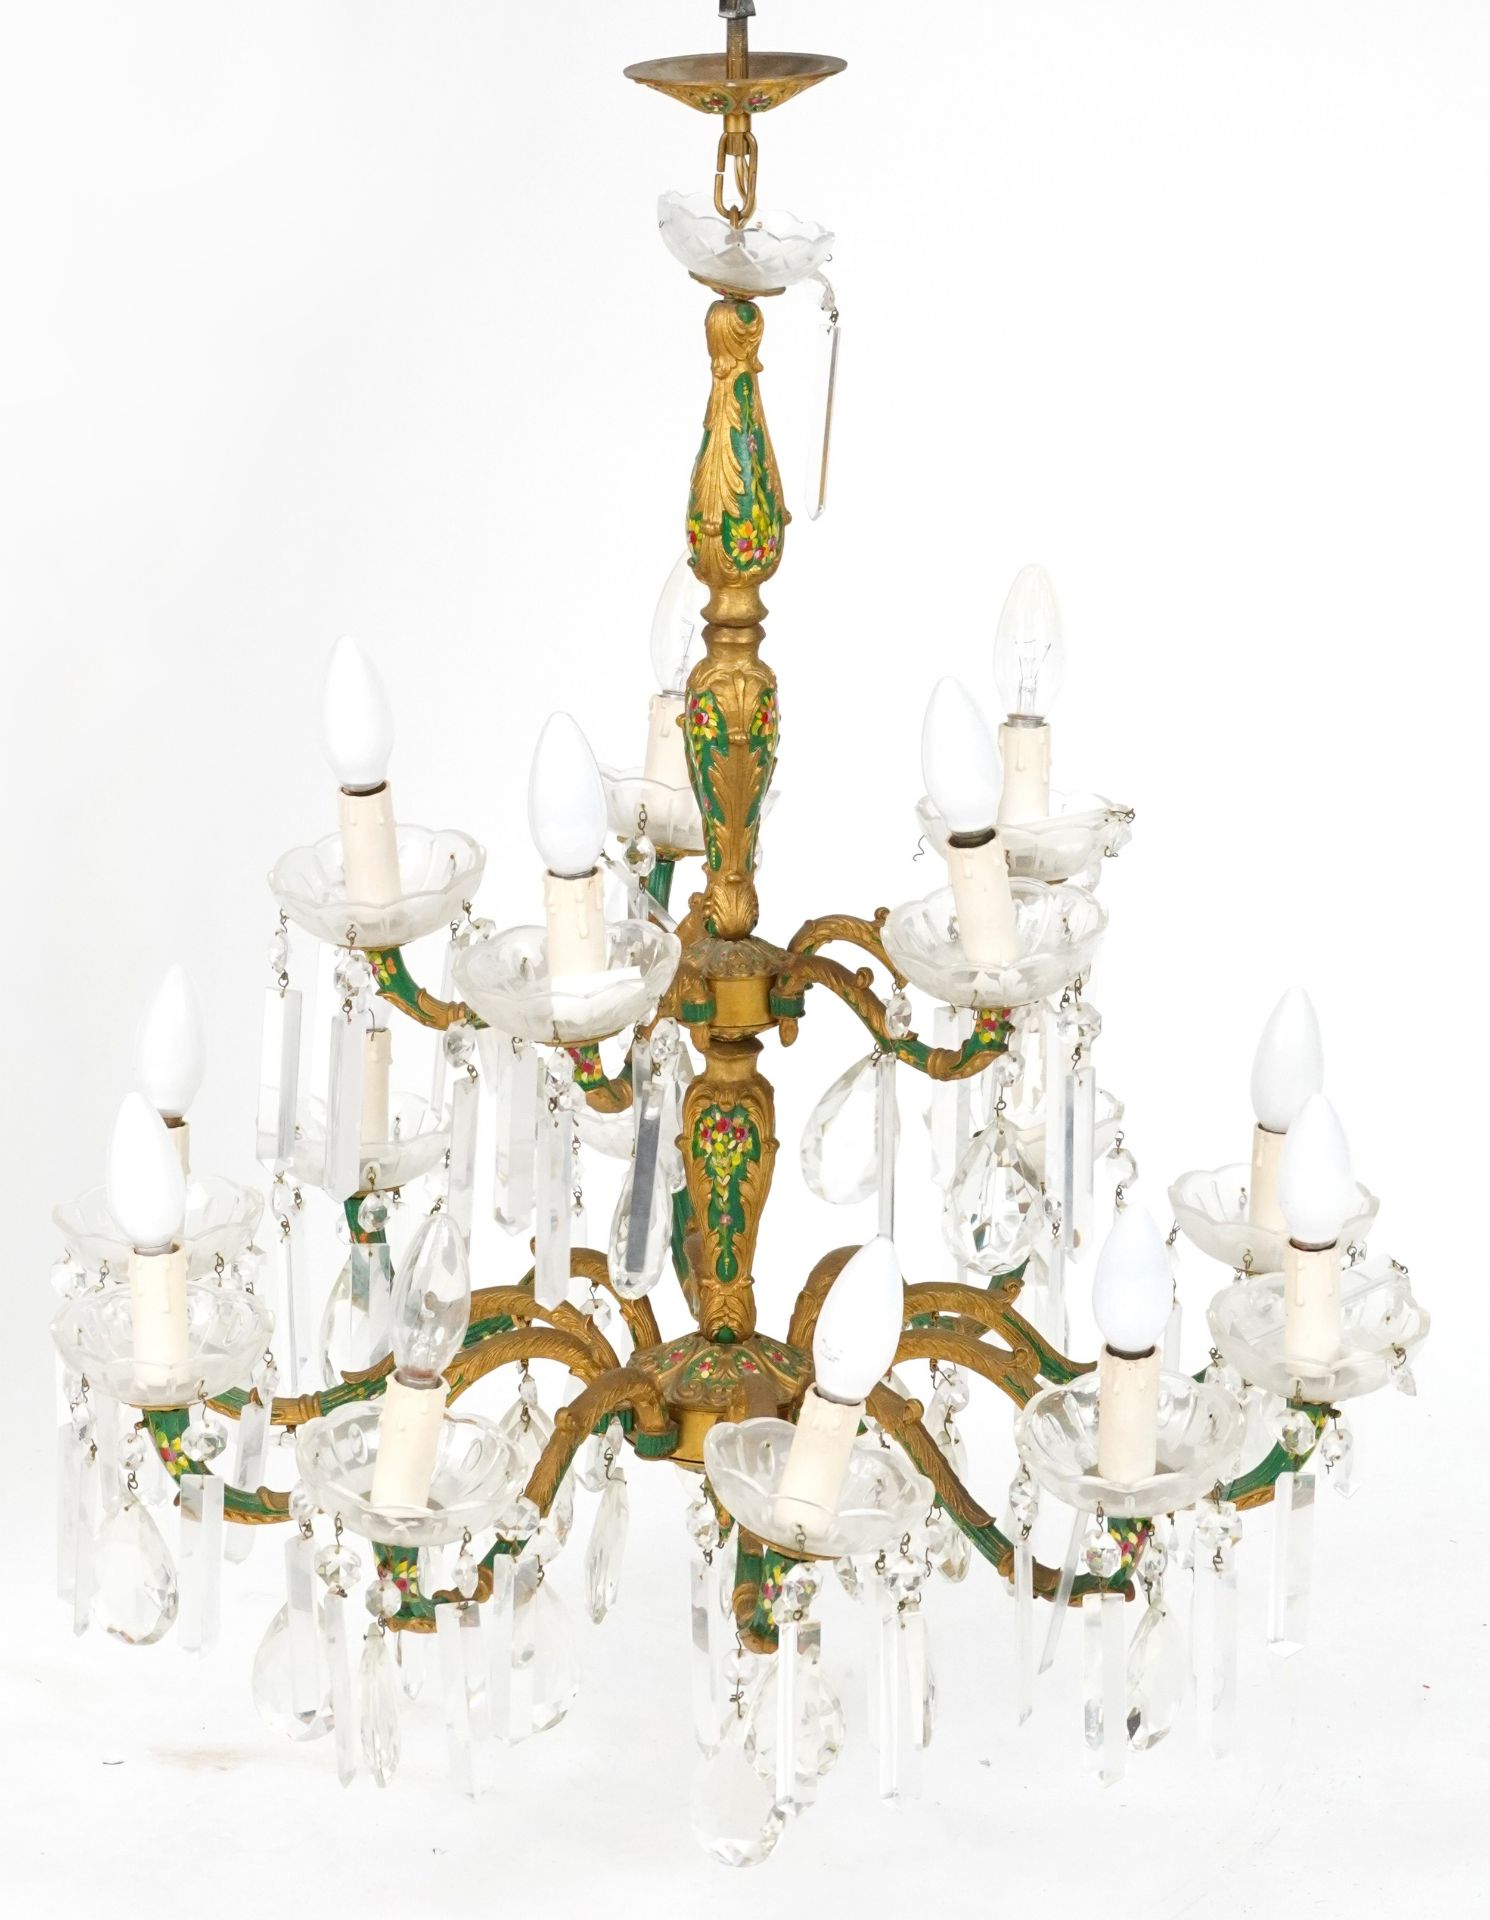 Ornate gilt metal seventeen branch chandelier with glass drops, hand painted with flowers, - Image 2 of 2